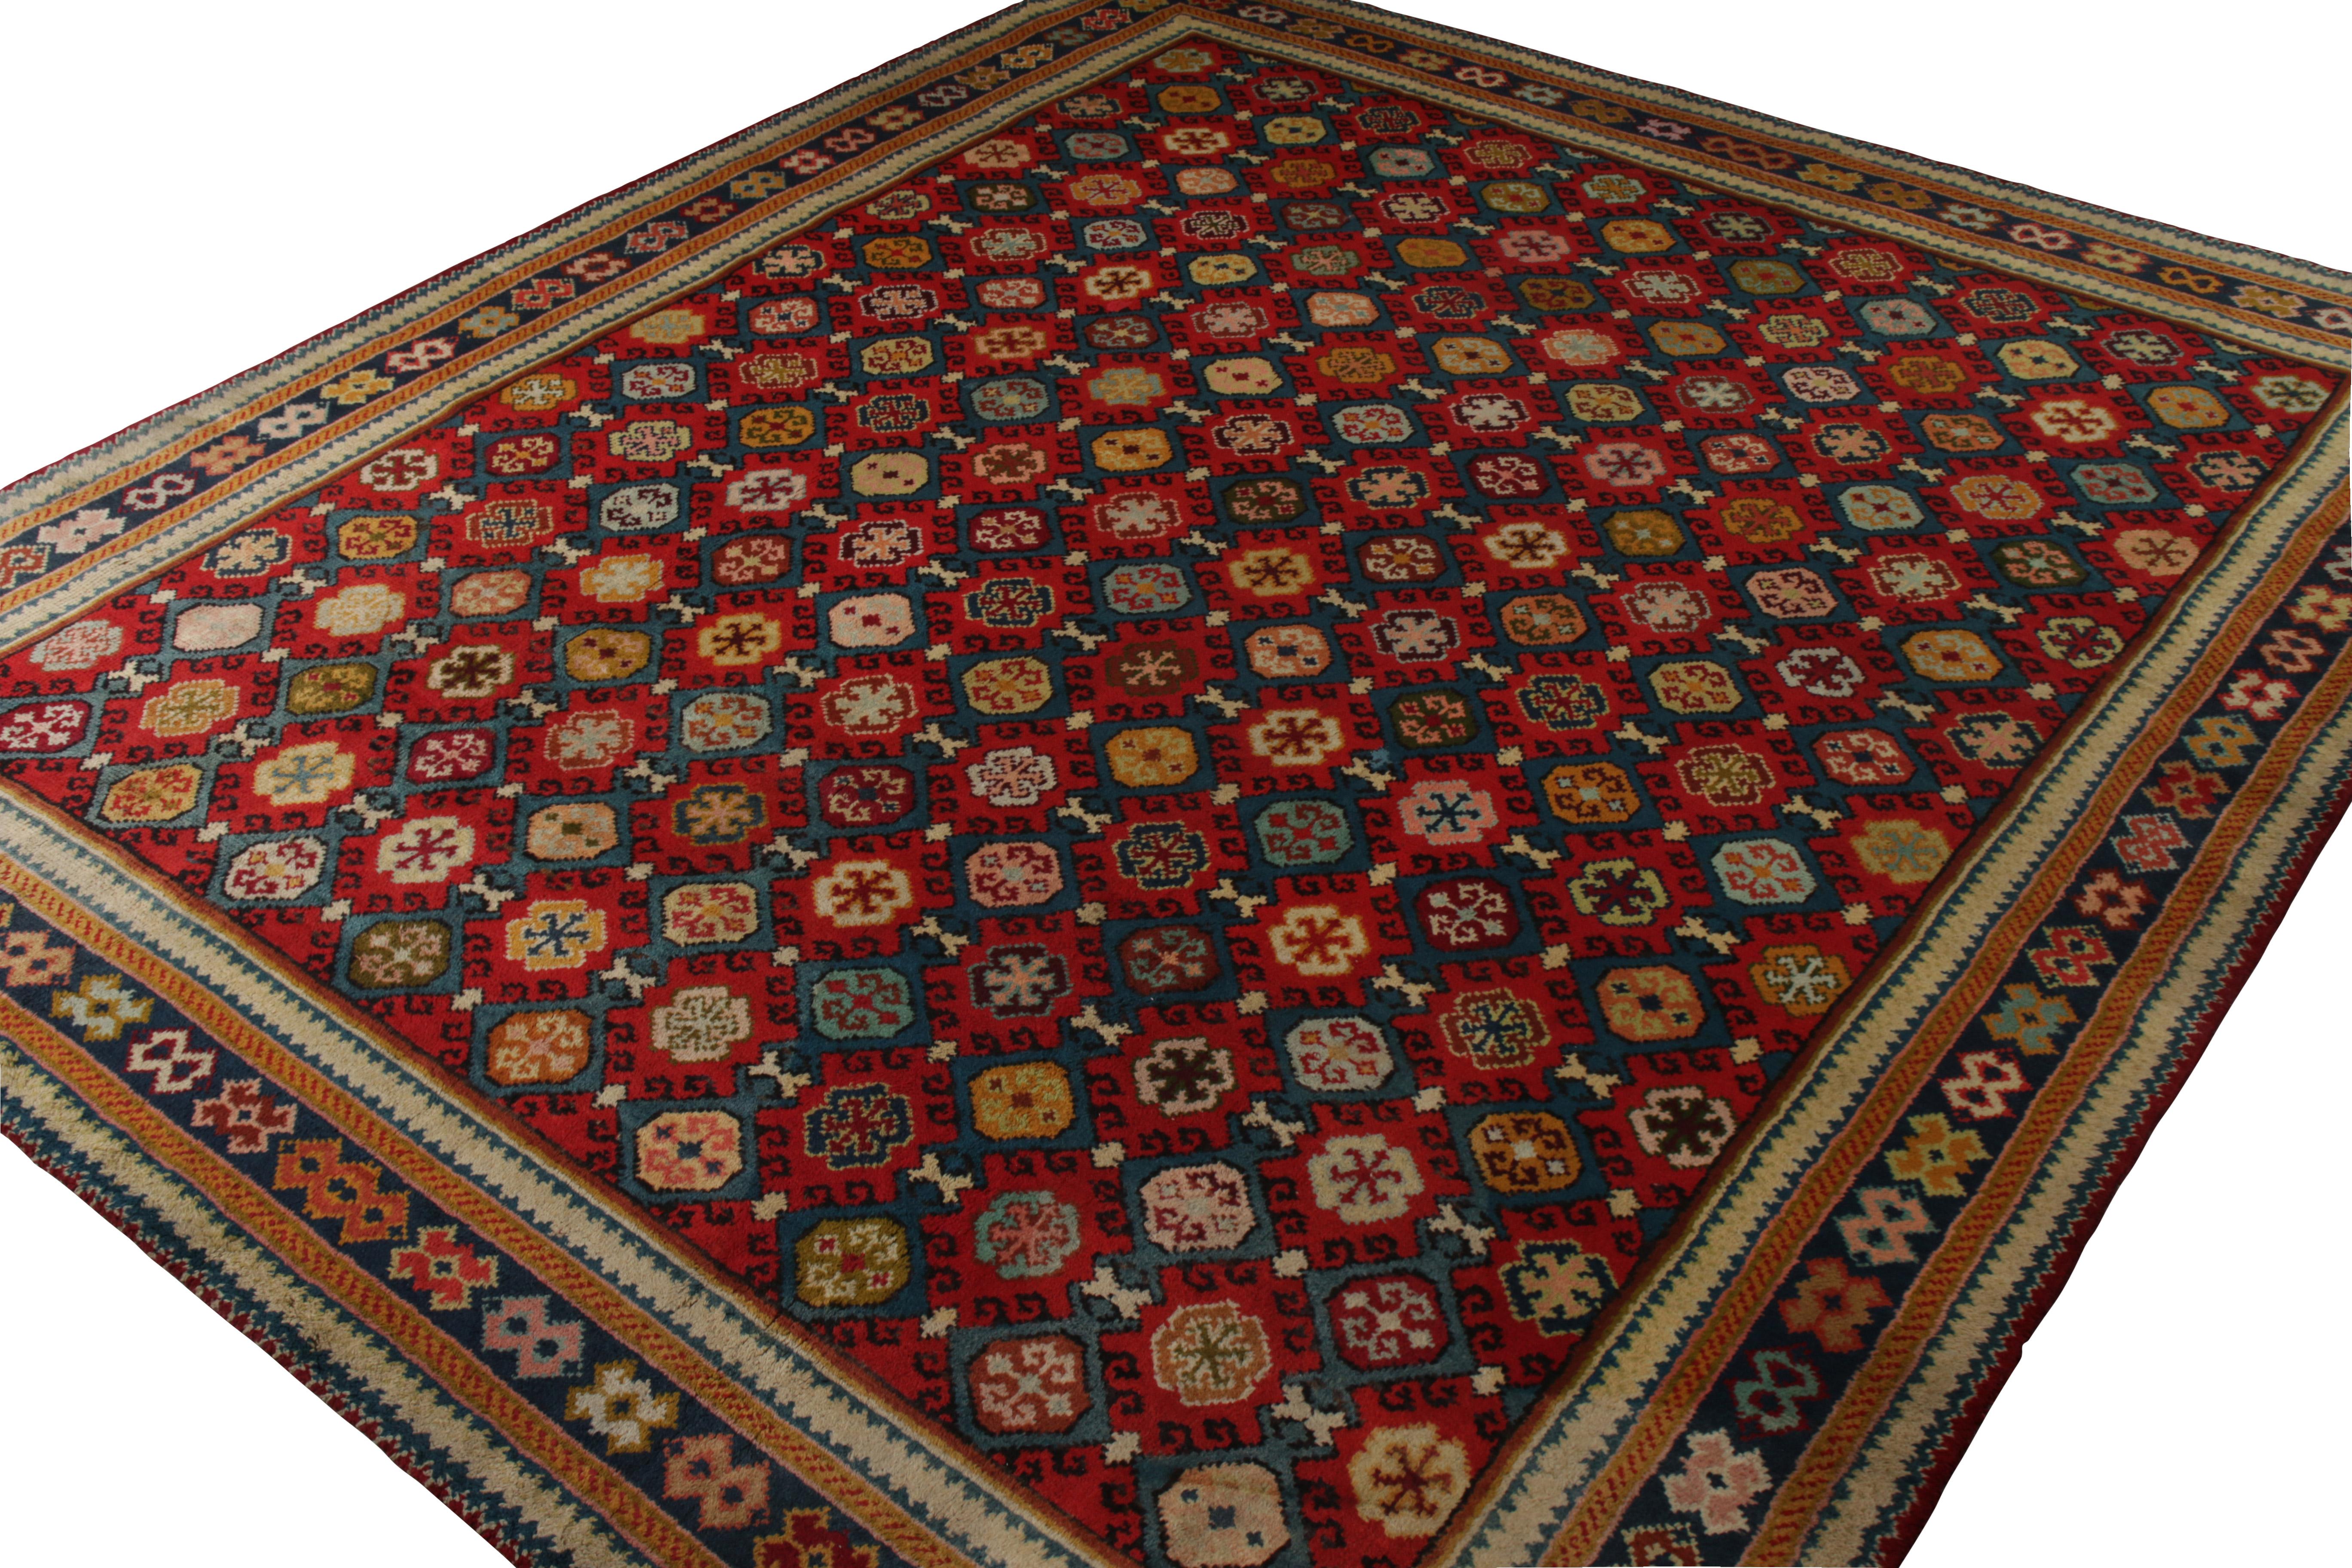 An antique 13x16 Axminster rug in blue and red, hand knotted in wool originating from England circa 1910-1920. Exemplifying handmade carpets of this period in the movement born in married color and all over geometric patterns. Enjoying a comfortable